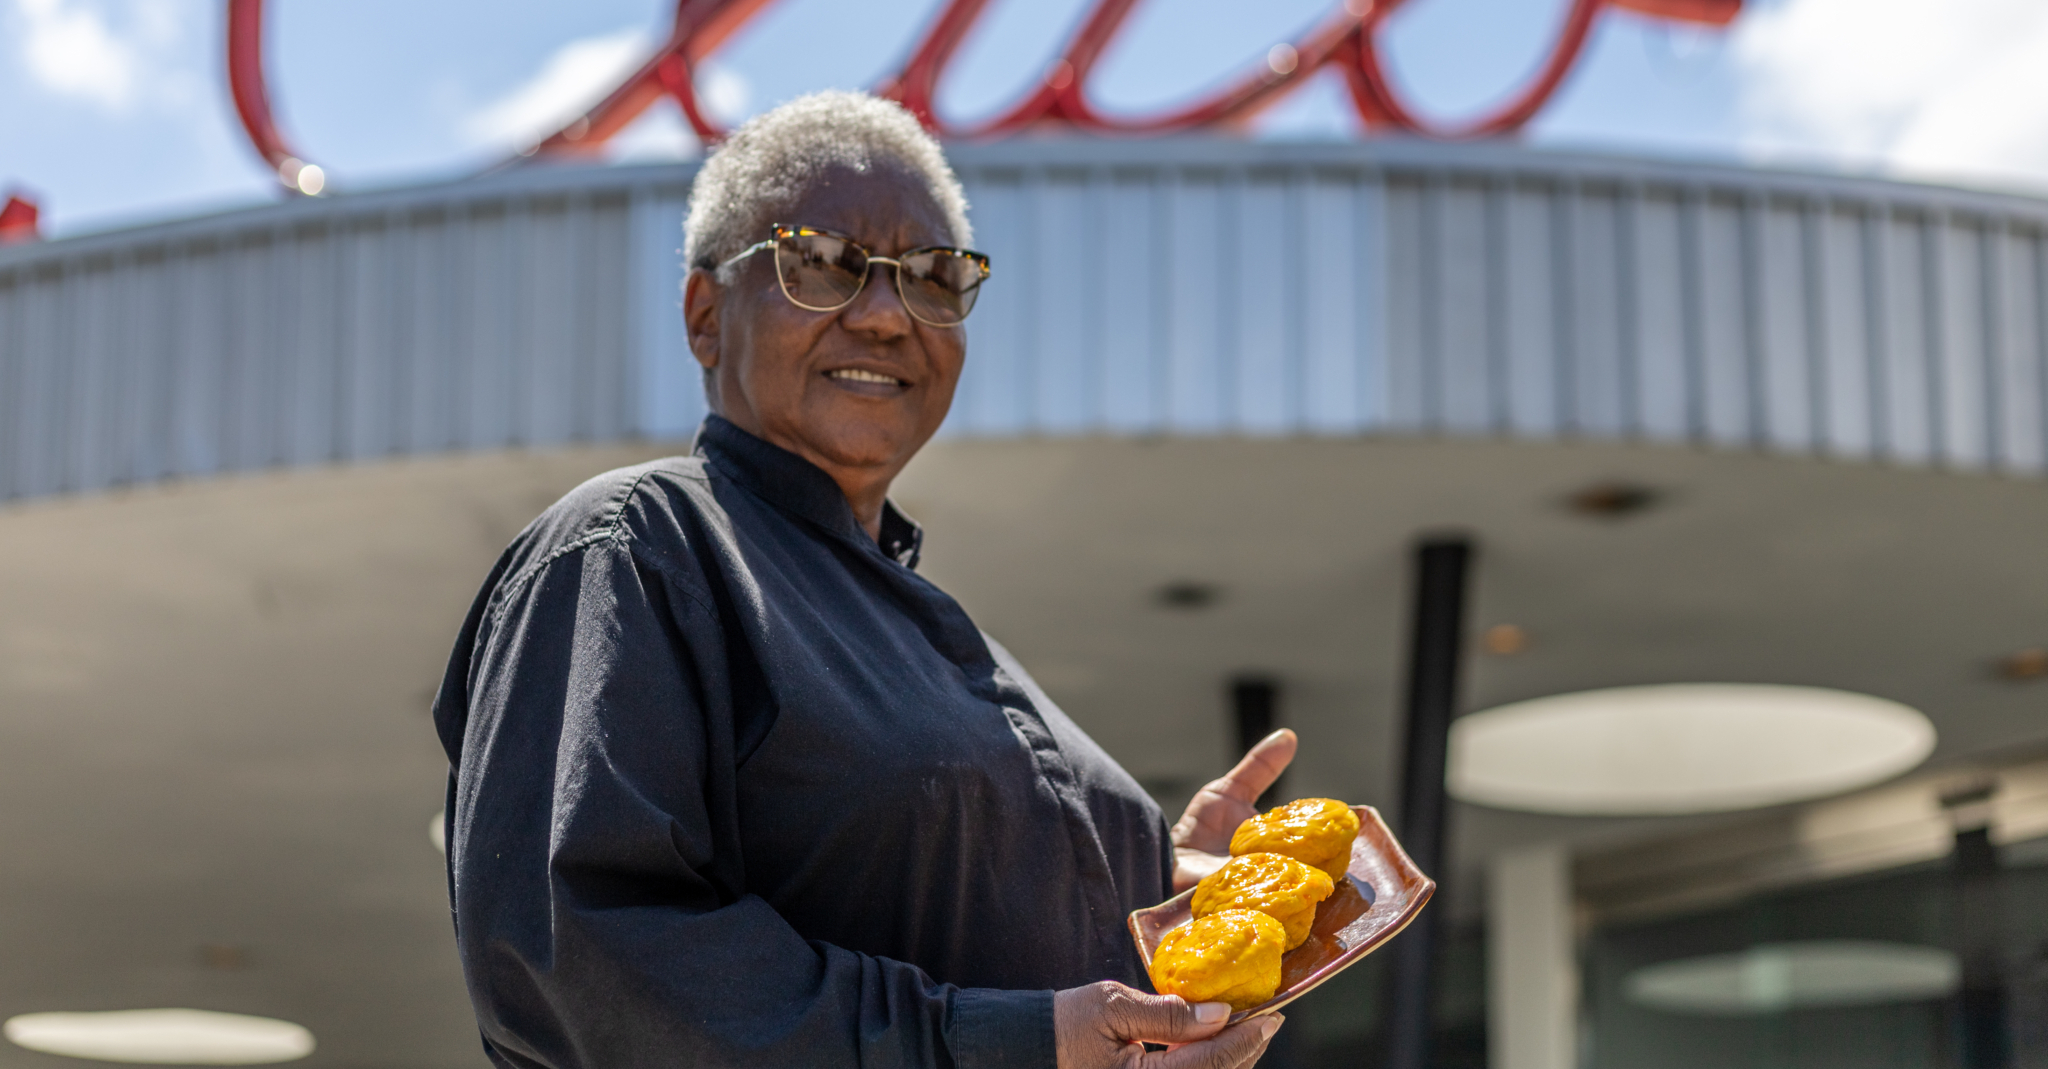 The delectable history behind Birmingham’s famous Orange Rolls [Photos]